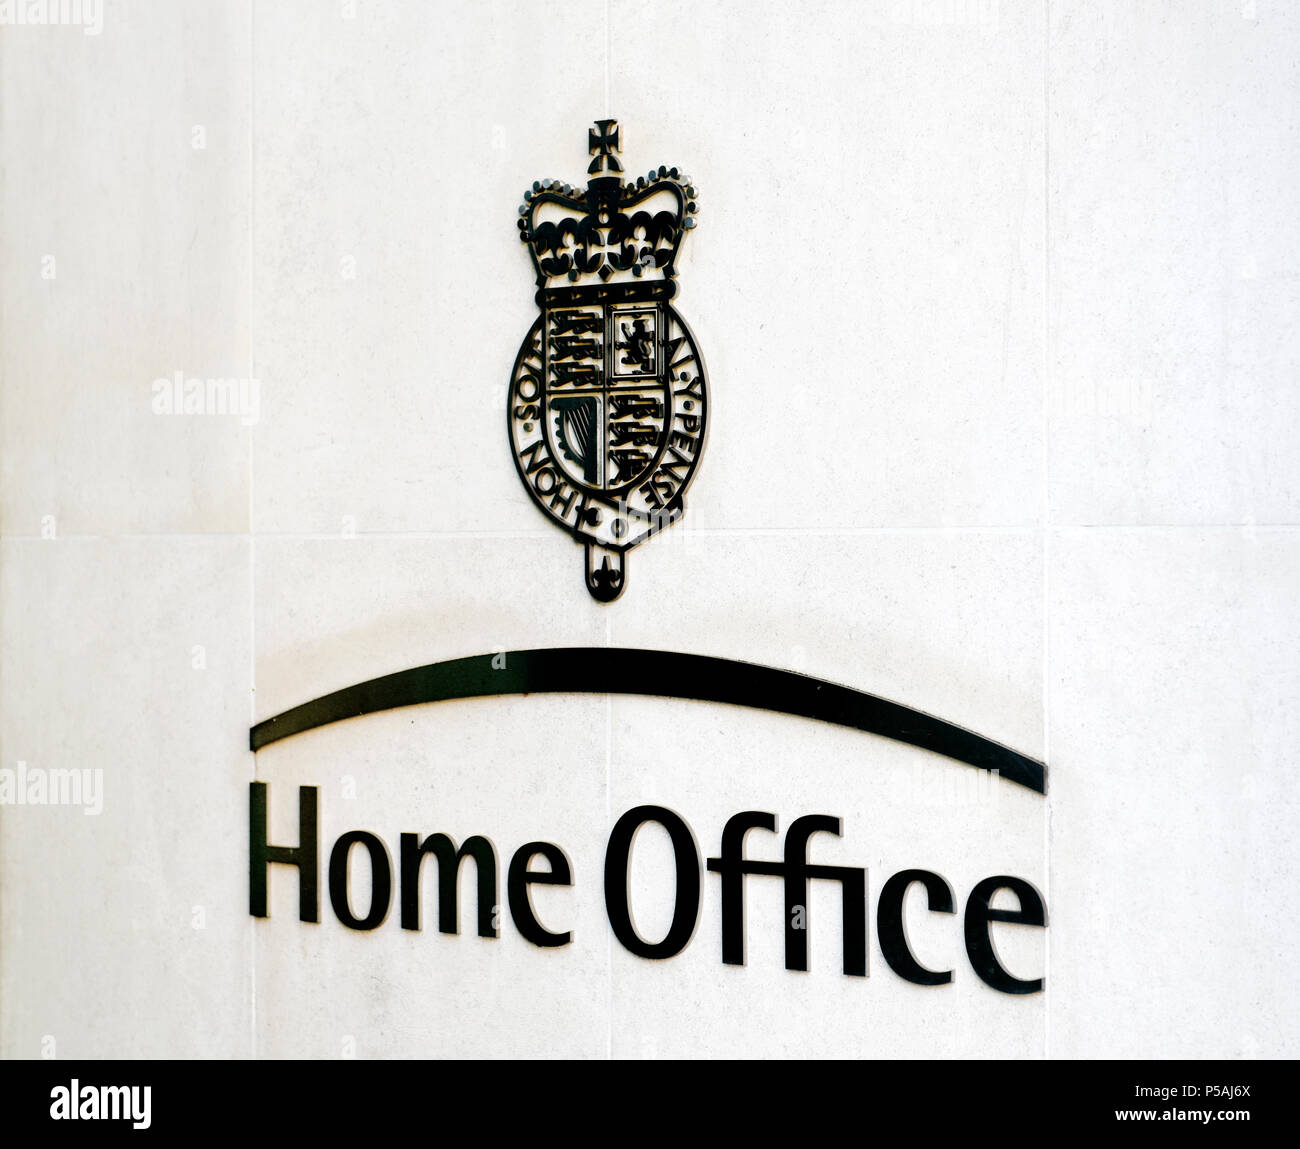 Home Office sign in front of Government Building, London Stock Photo